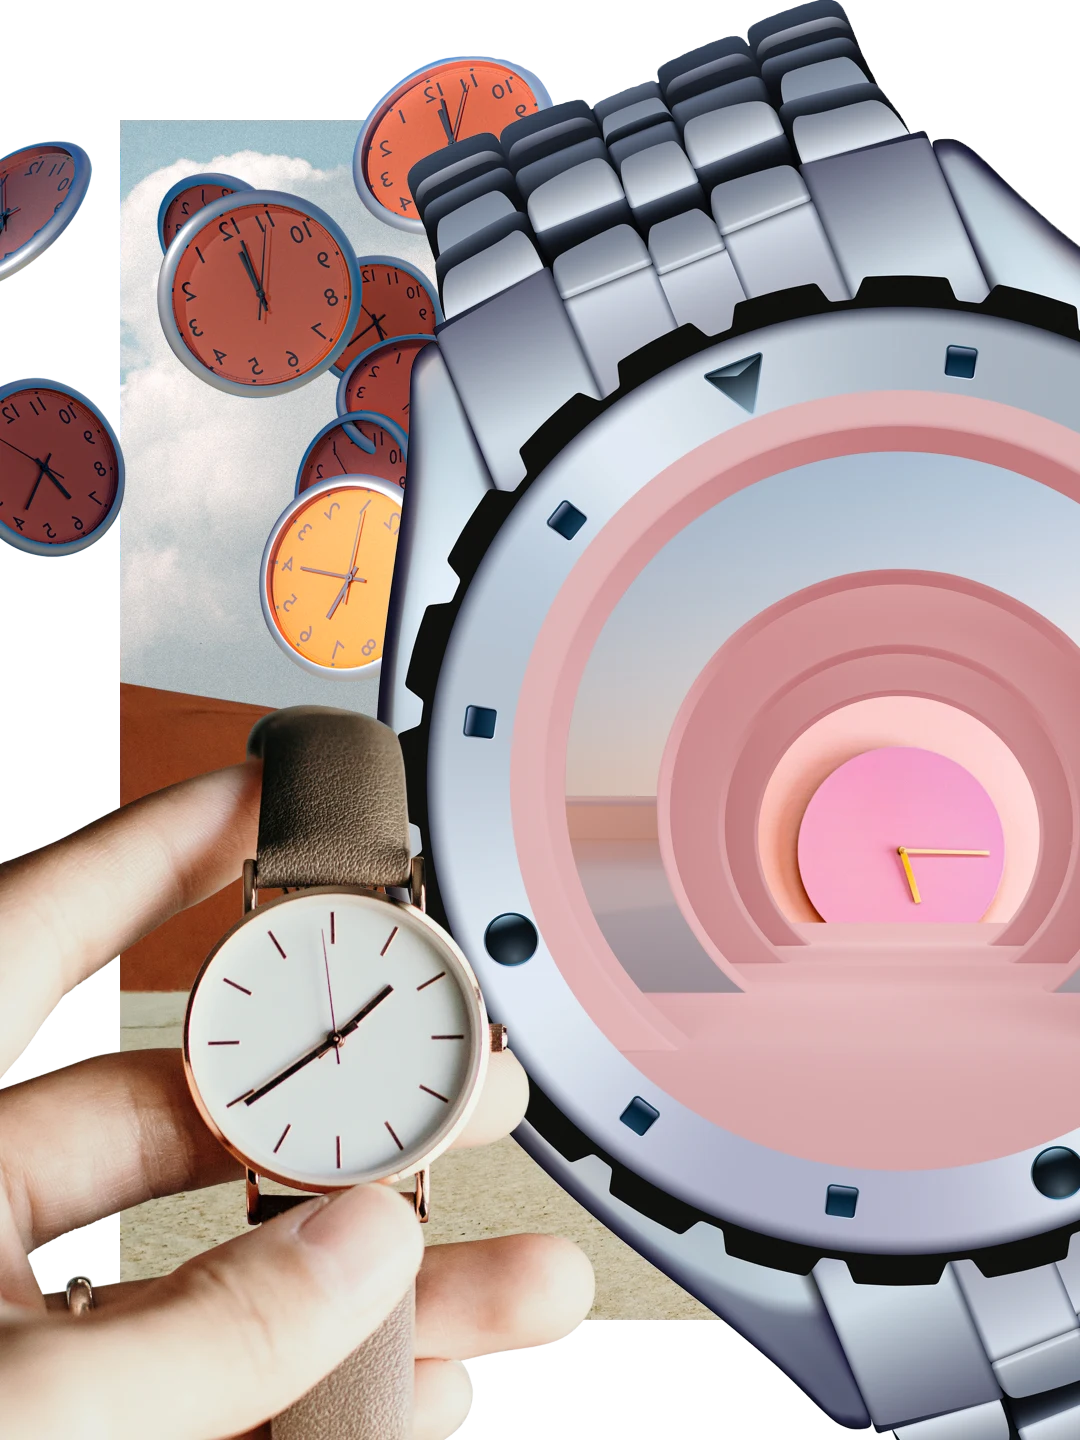 Collage of different clocks and watches. A white hand is holding a leather wristwatch on the left. A big metal wristwatch is in the centre, with a pink face and yellow hands. Watches in shades of brown and gold are floating in clouds in the background.
